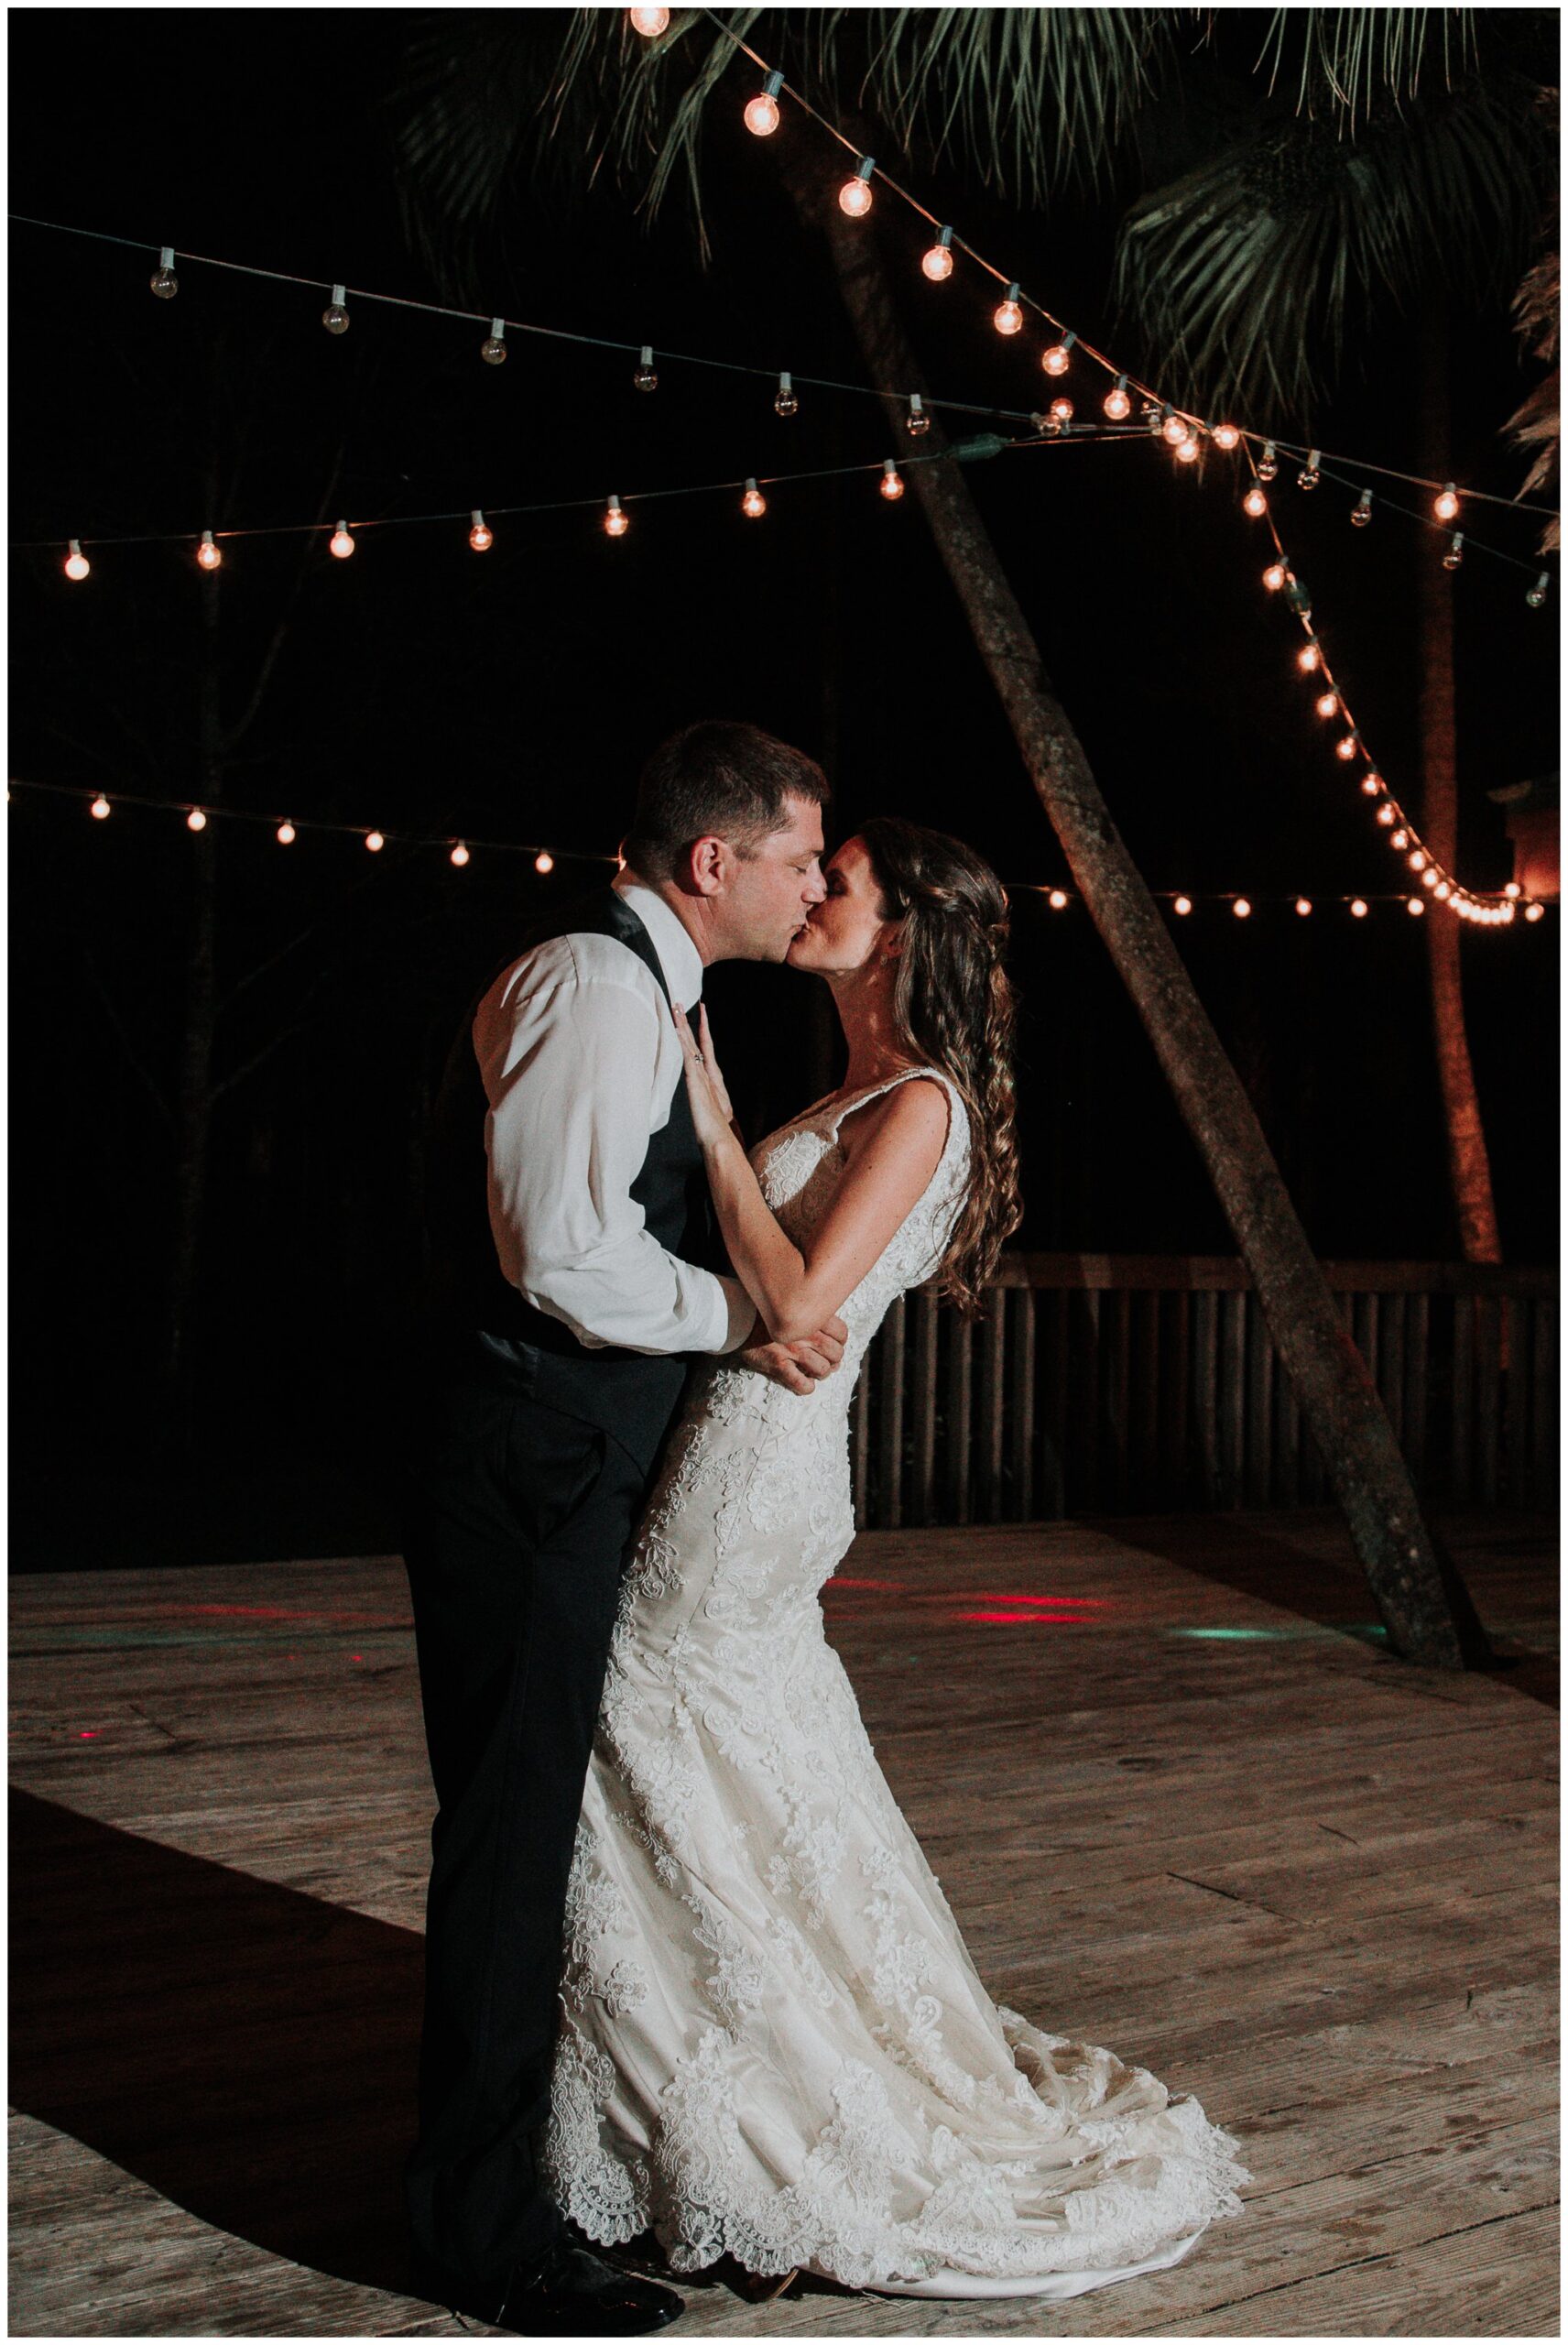 Nicole and Jimmy-BMR Stables Wedding-kimberly smith photography_0048.jpg